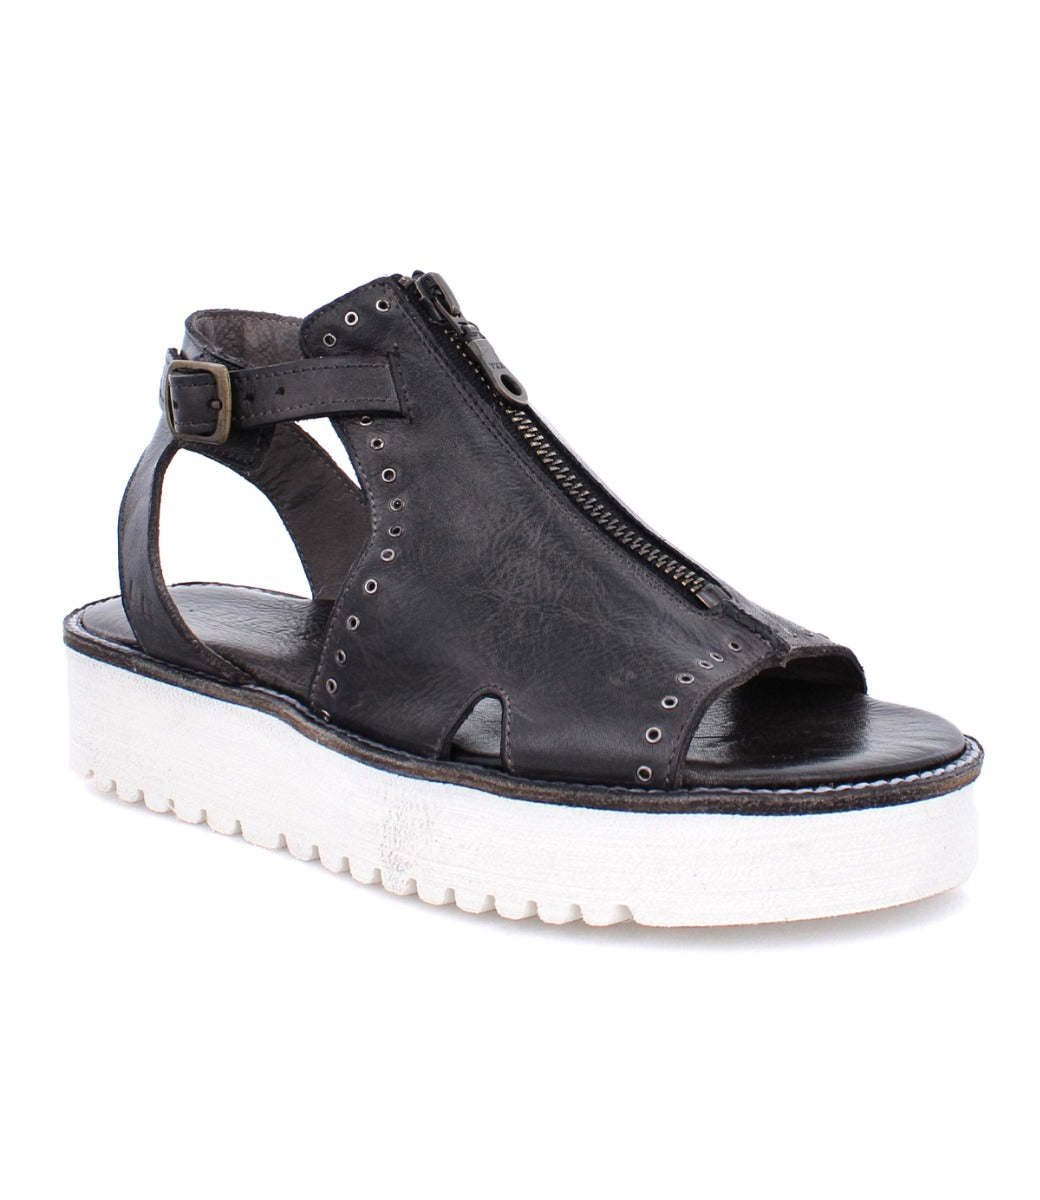 A Clancy sandal by Bed Stu, made of black pure leather with a white sole.